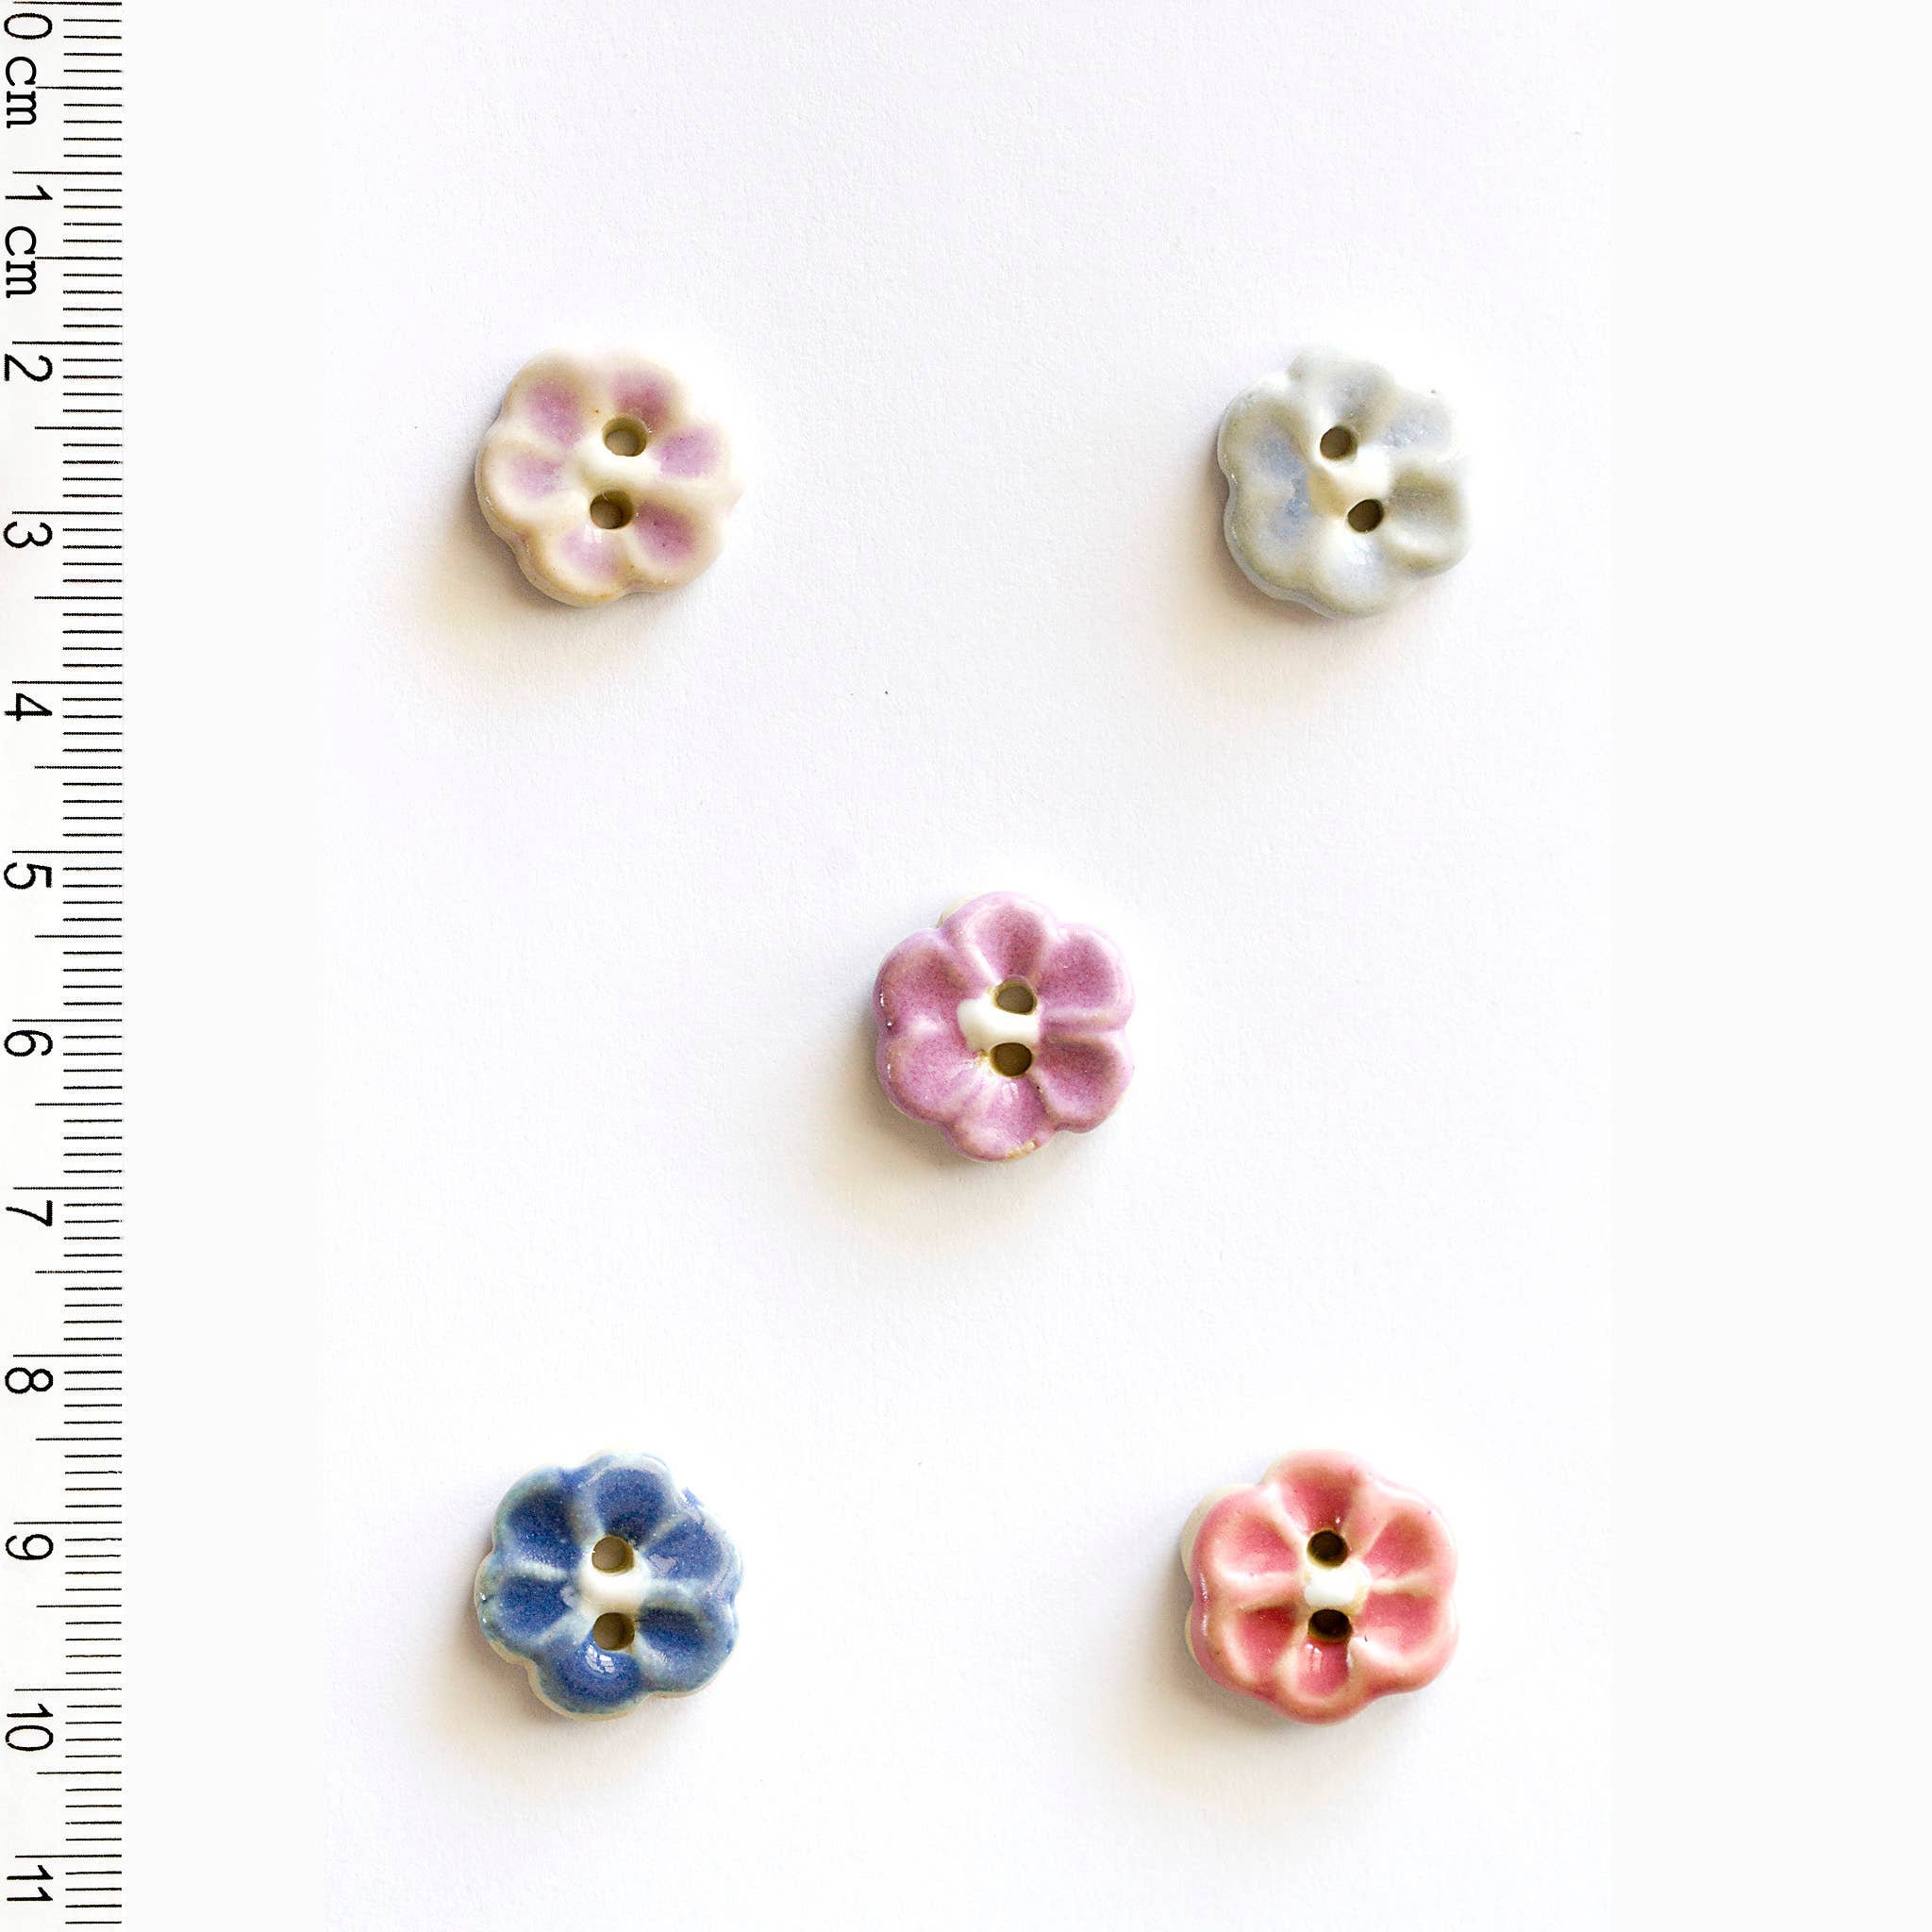 Incomparable Buttons - 5 Flower Buttons